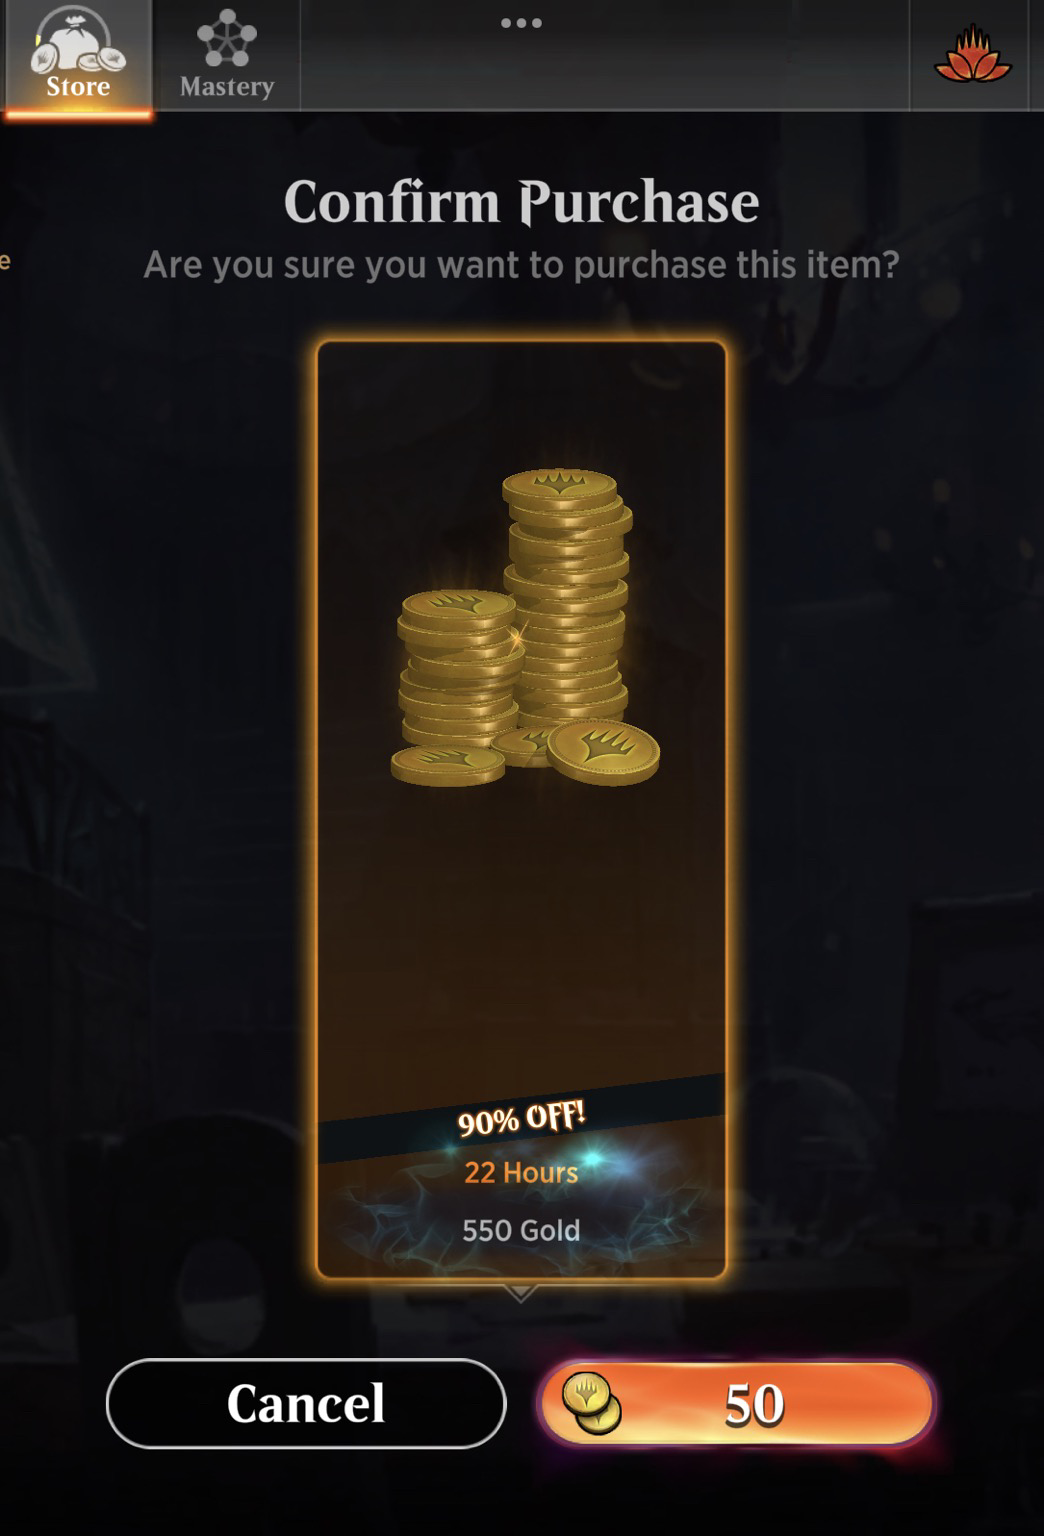 Stacks of 550 gold available in the magic arena store for 50 gold